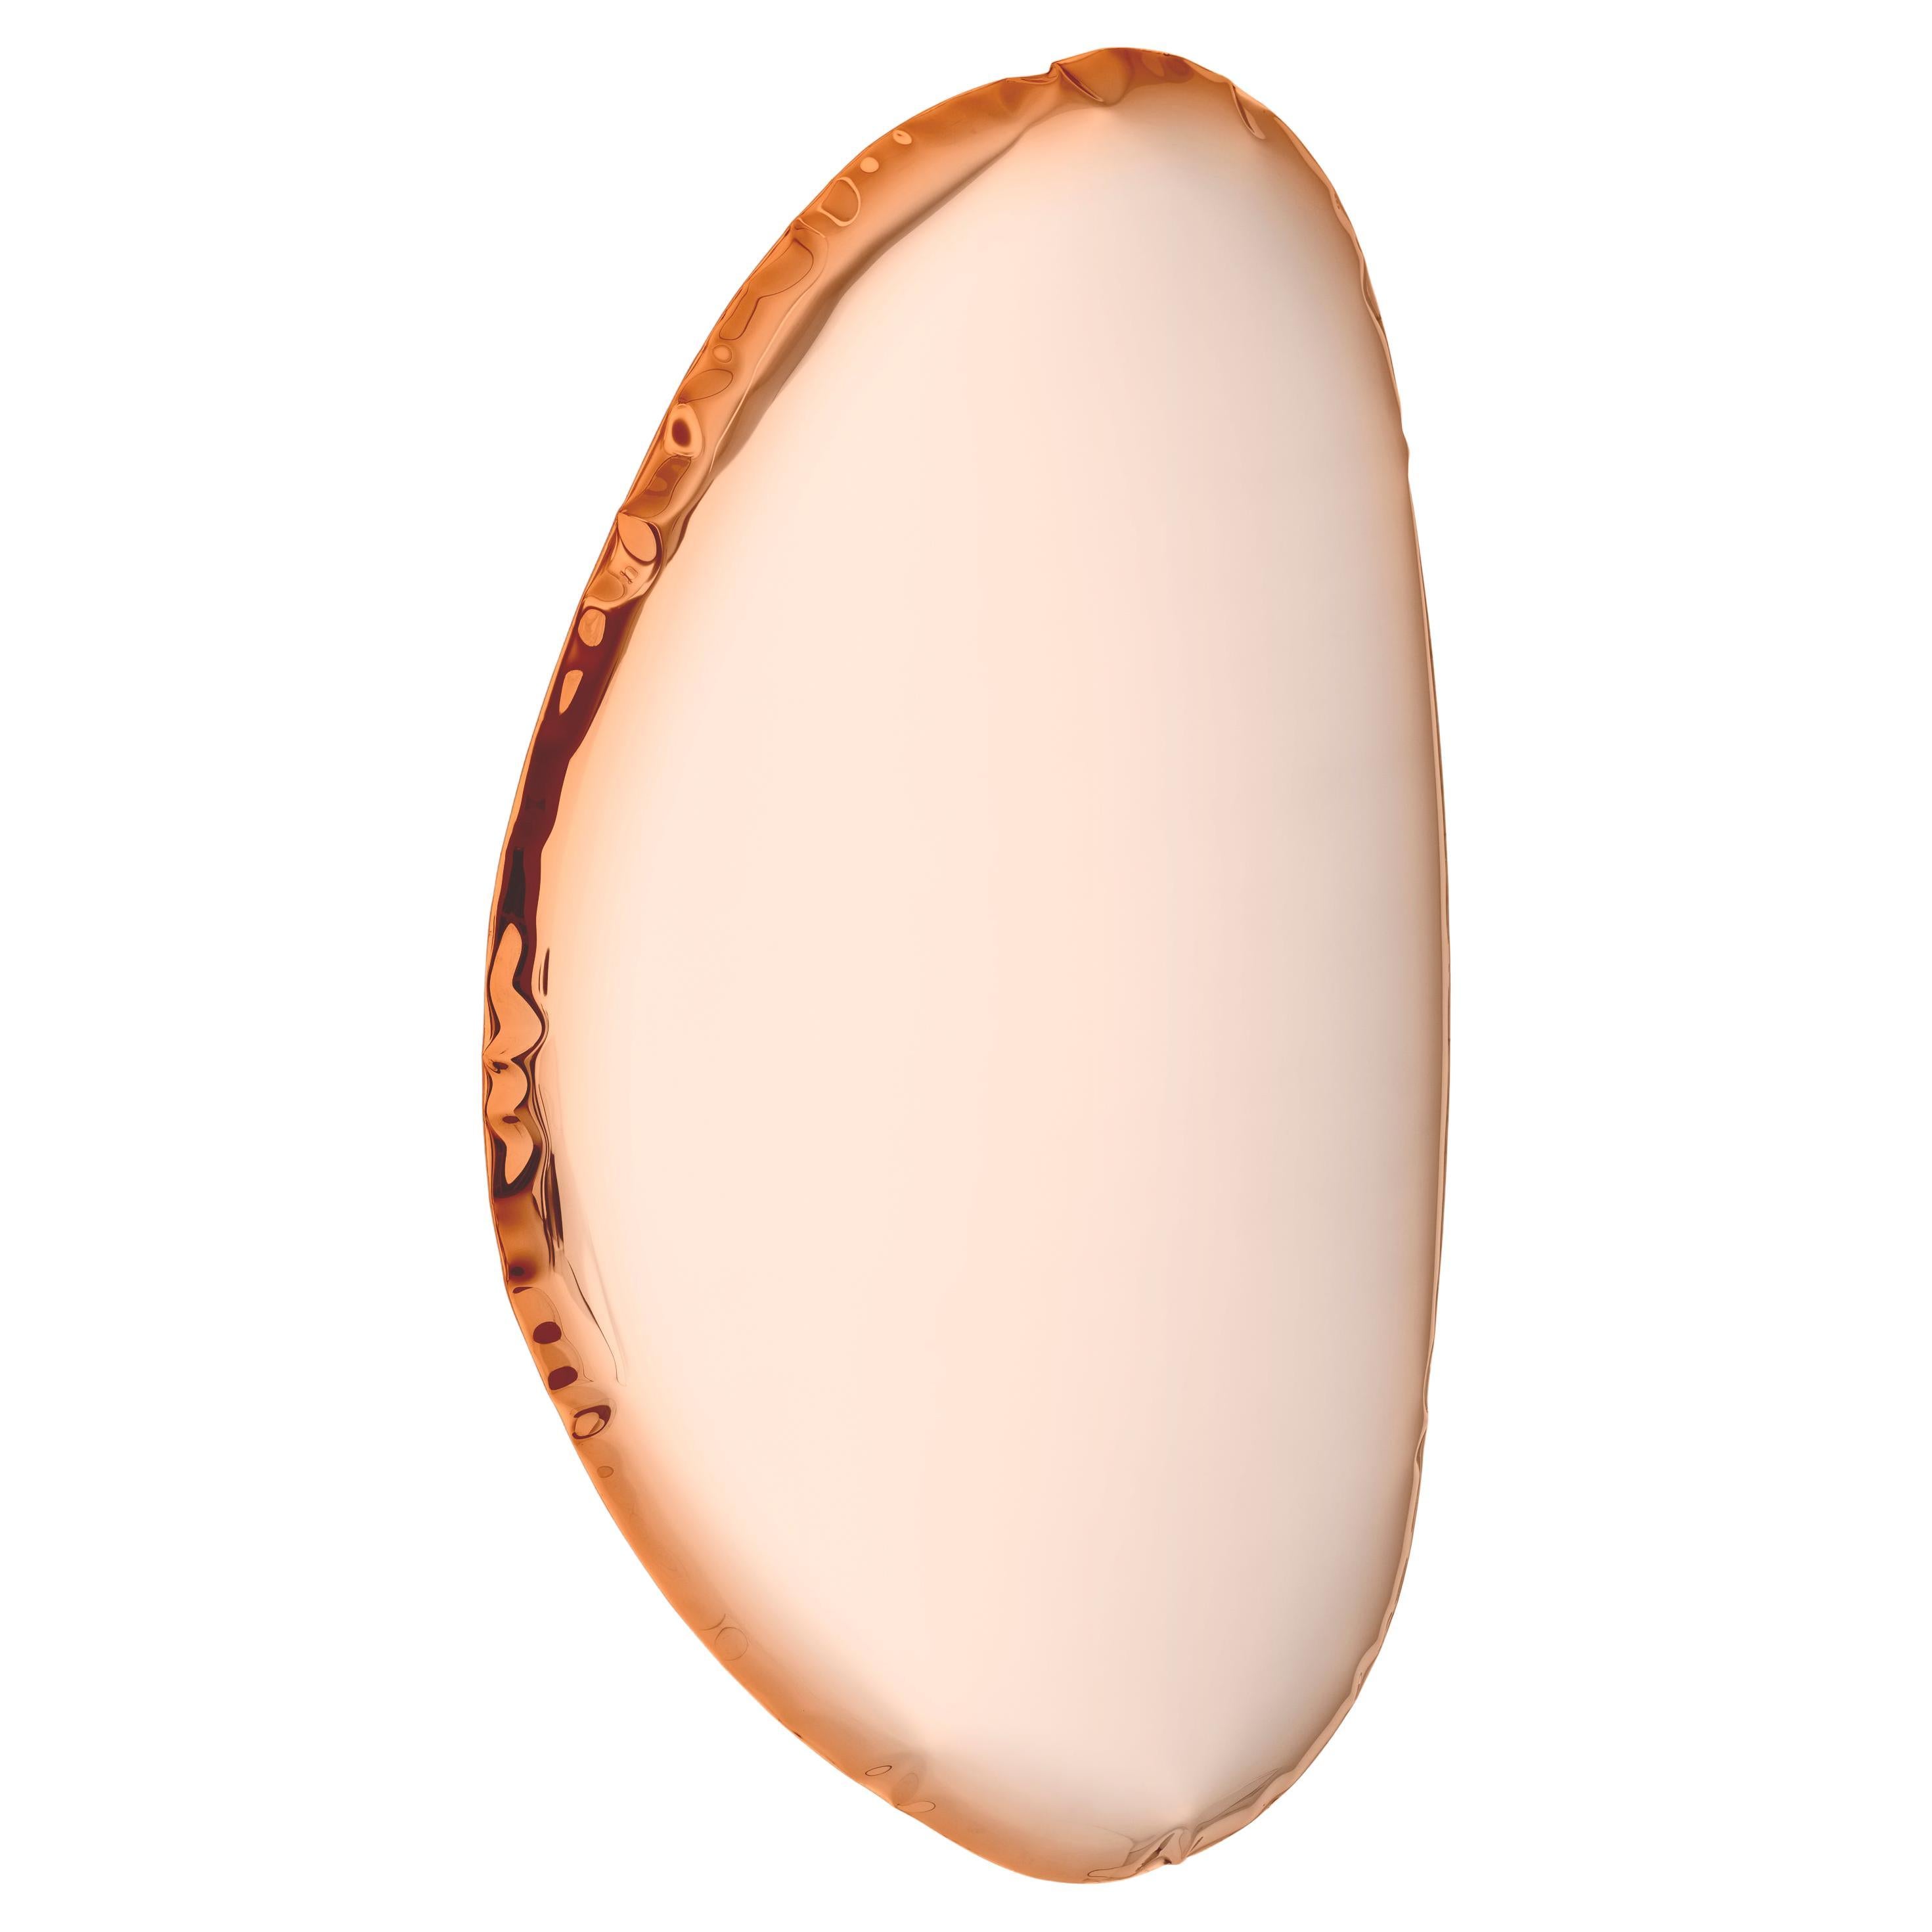 Tafla O3 Polished Stainless Steel Rose Gold Color Wall Mirror by Zieta